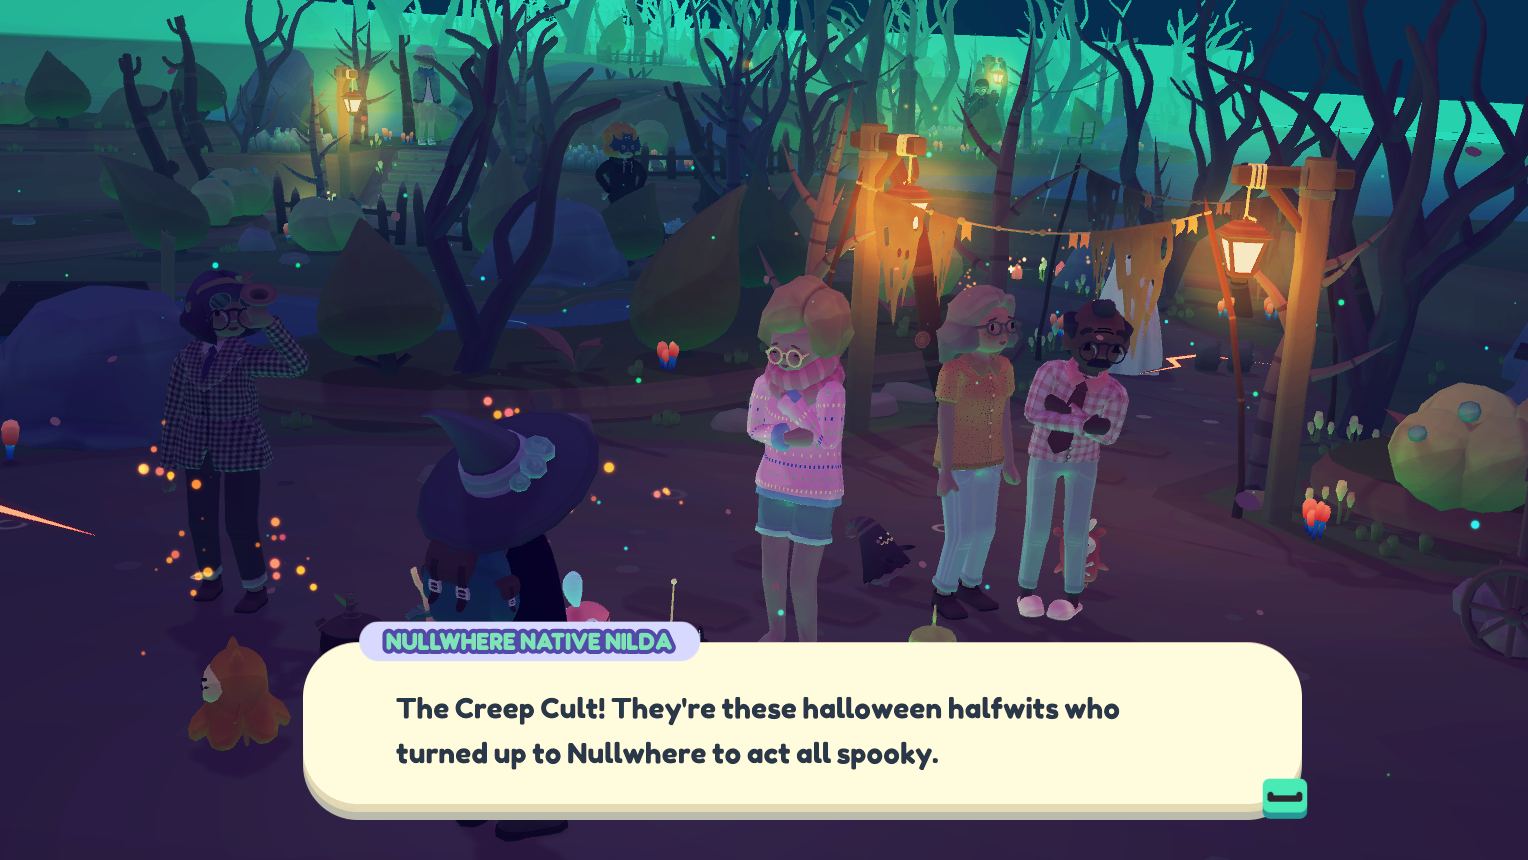 Ooblets instal the new version for windows